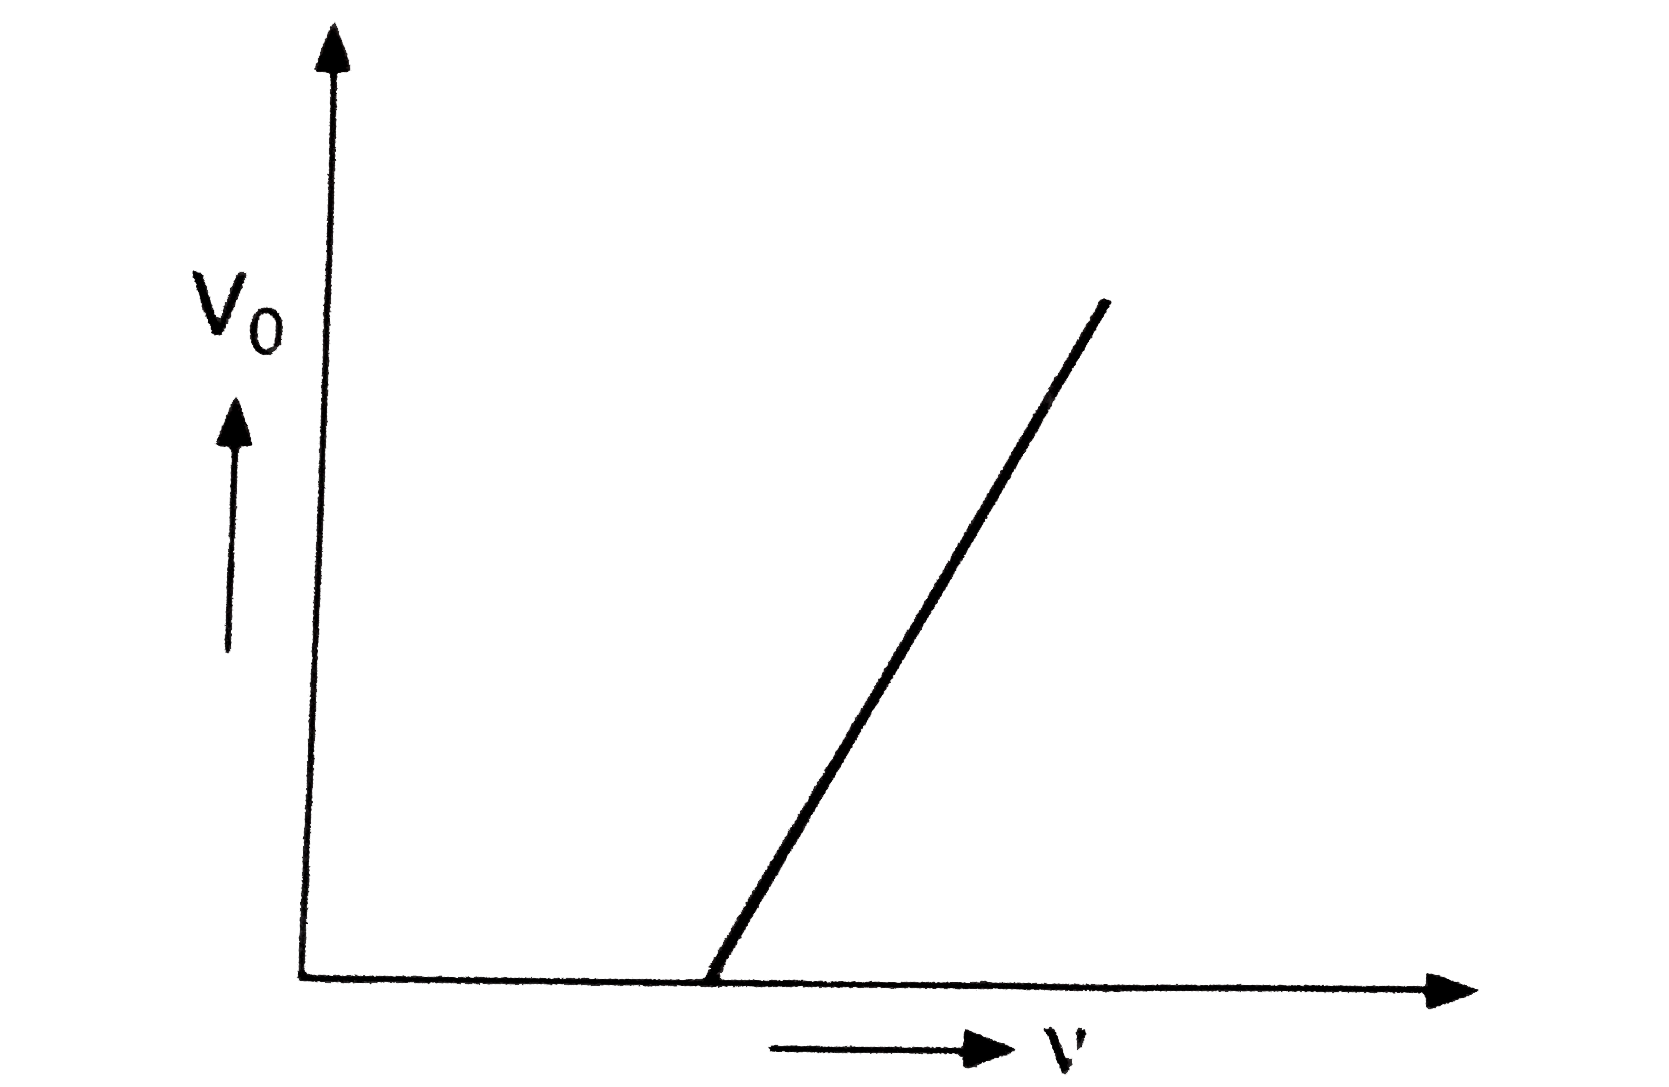 In photoelectric effect the slope of straight line graph between stopping potential (V(0)) and freqency of incident light (v) gives: